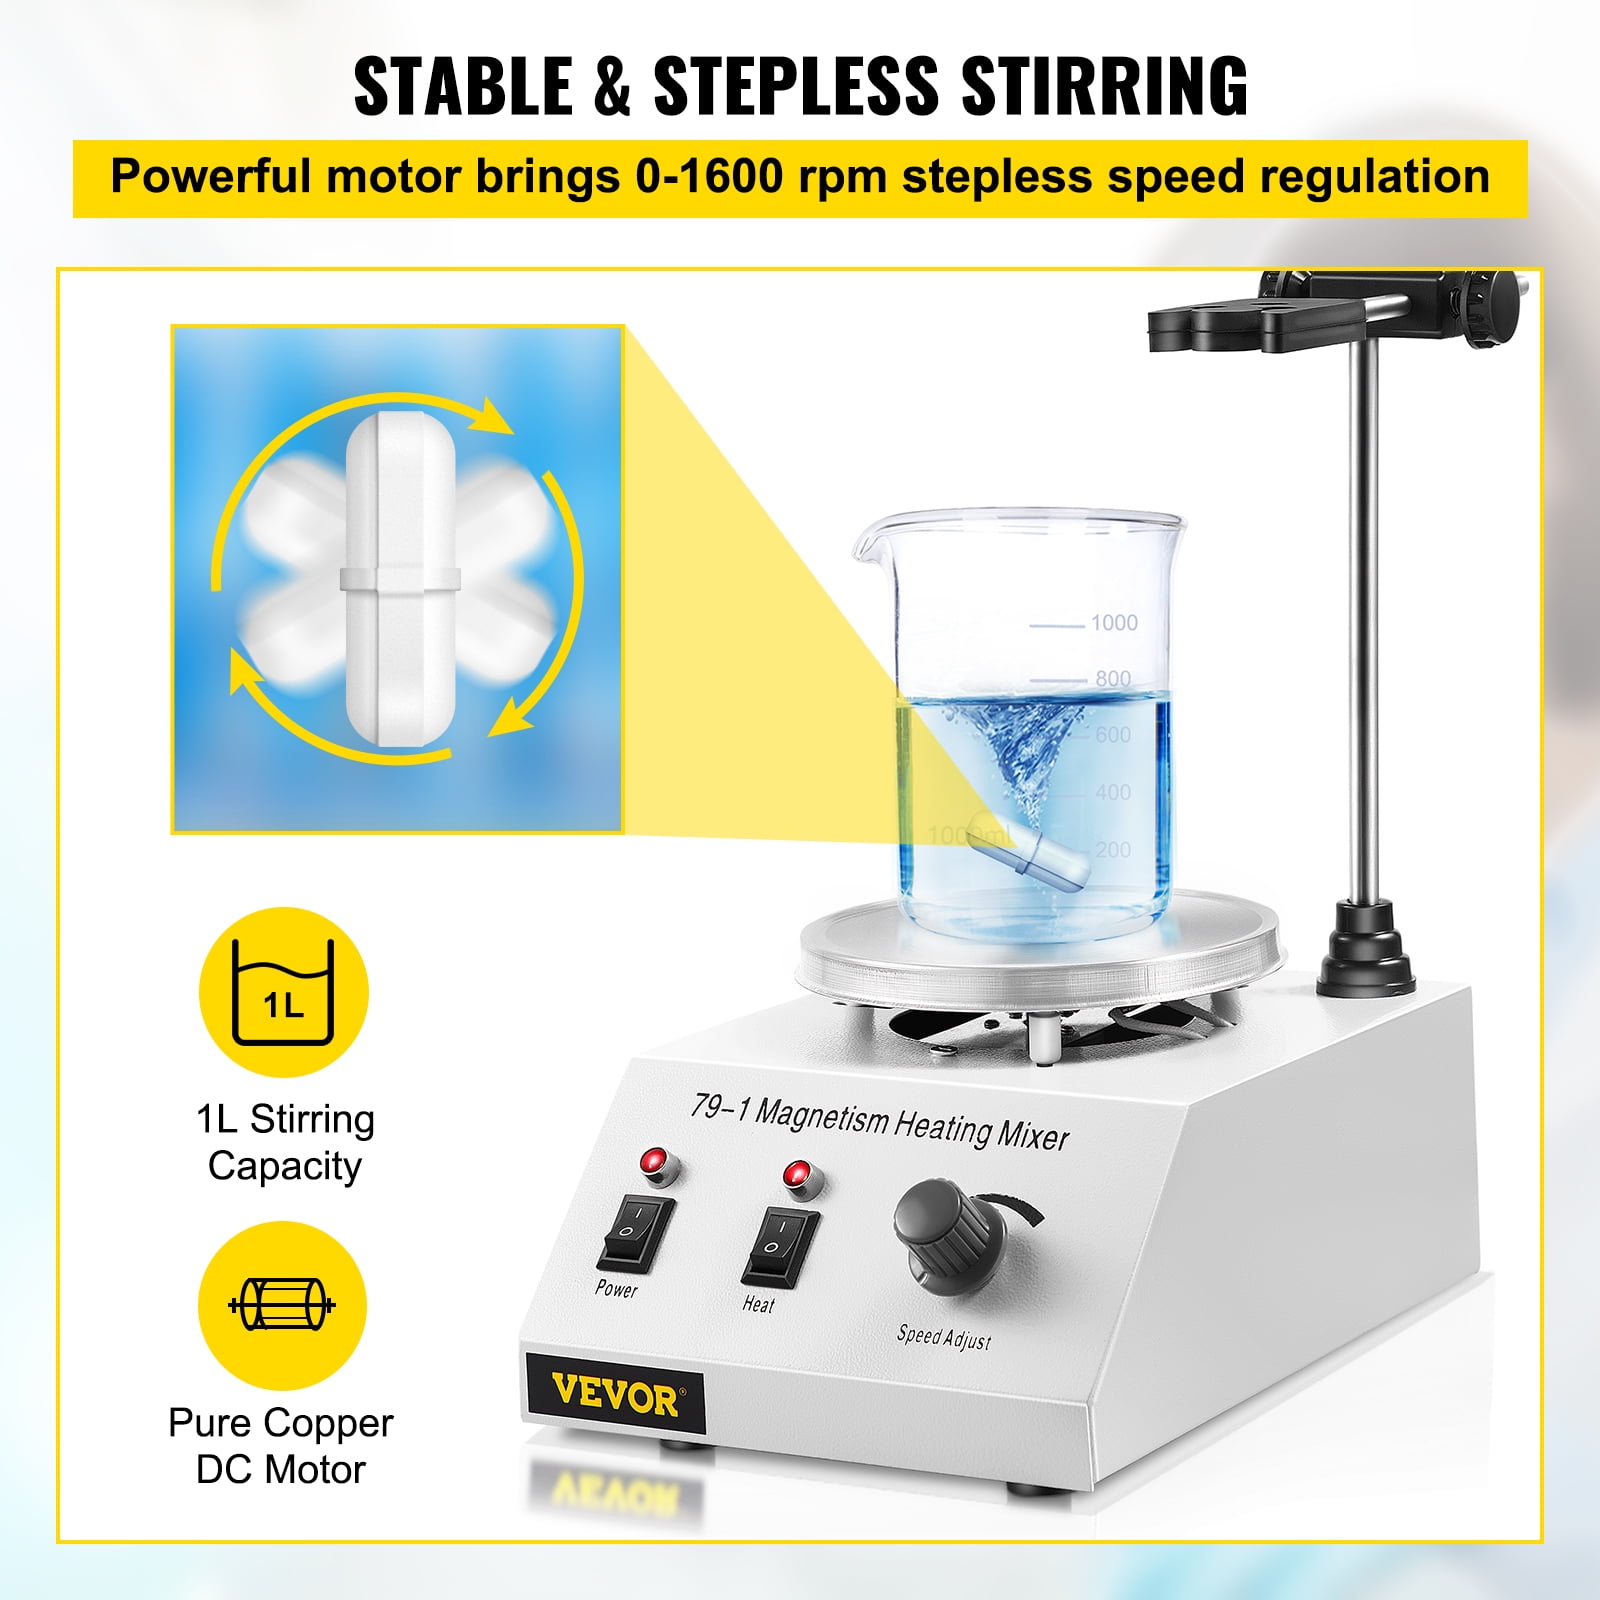 Patioer Magnetic Stirrer Mixer Machine with 5.3 Round Heating Plate Laboratory 2400 r/min max 110V 200W 